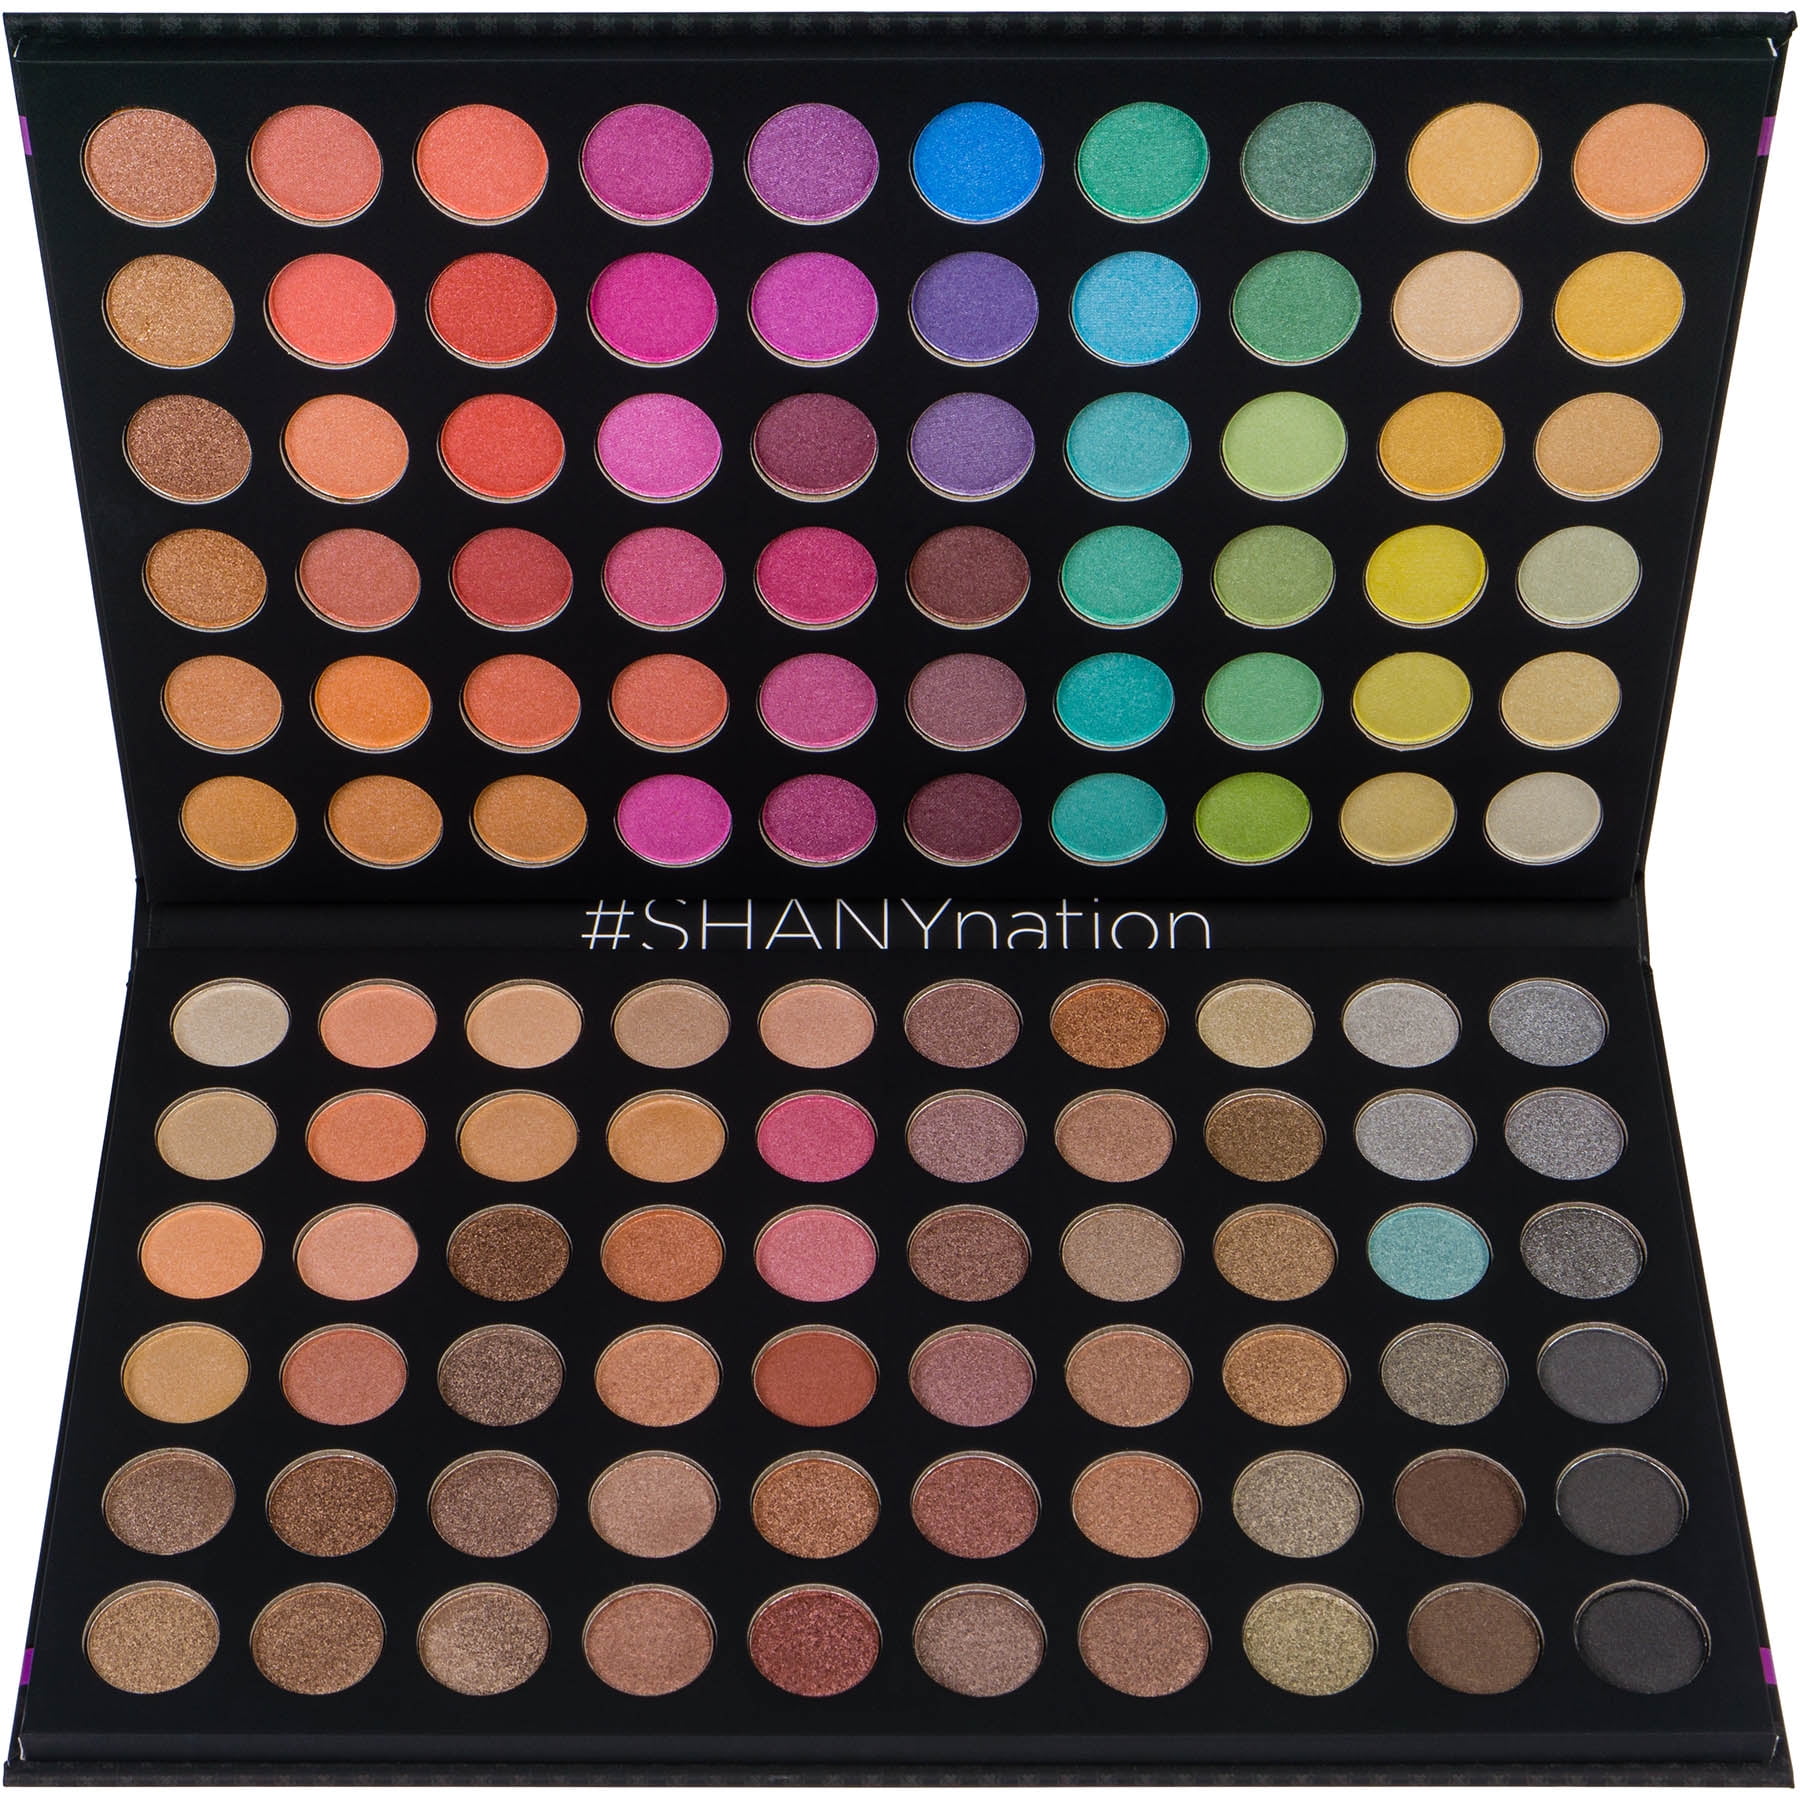 SHANY Ultimate - 120 Color Highly Pigmented Makeup Long Lasting Blendable Natural Colors Eye shadow Palette Natural Nude and Neon Combination - Walmart.com